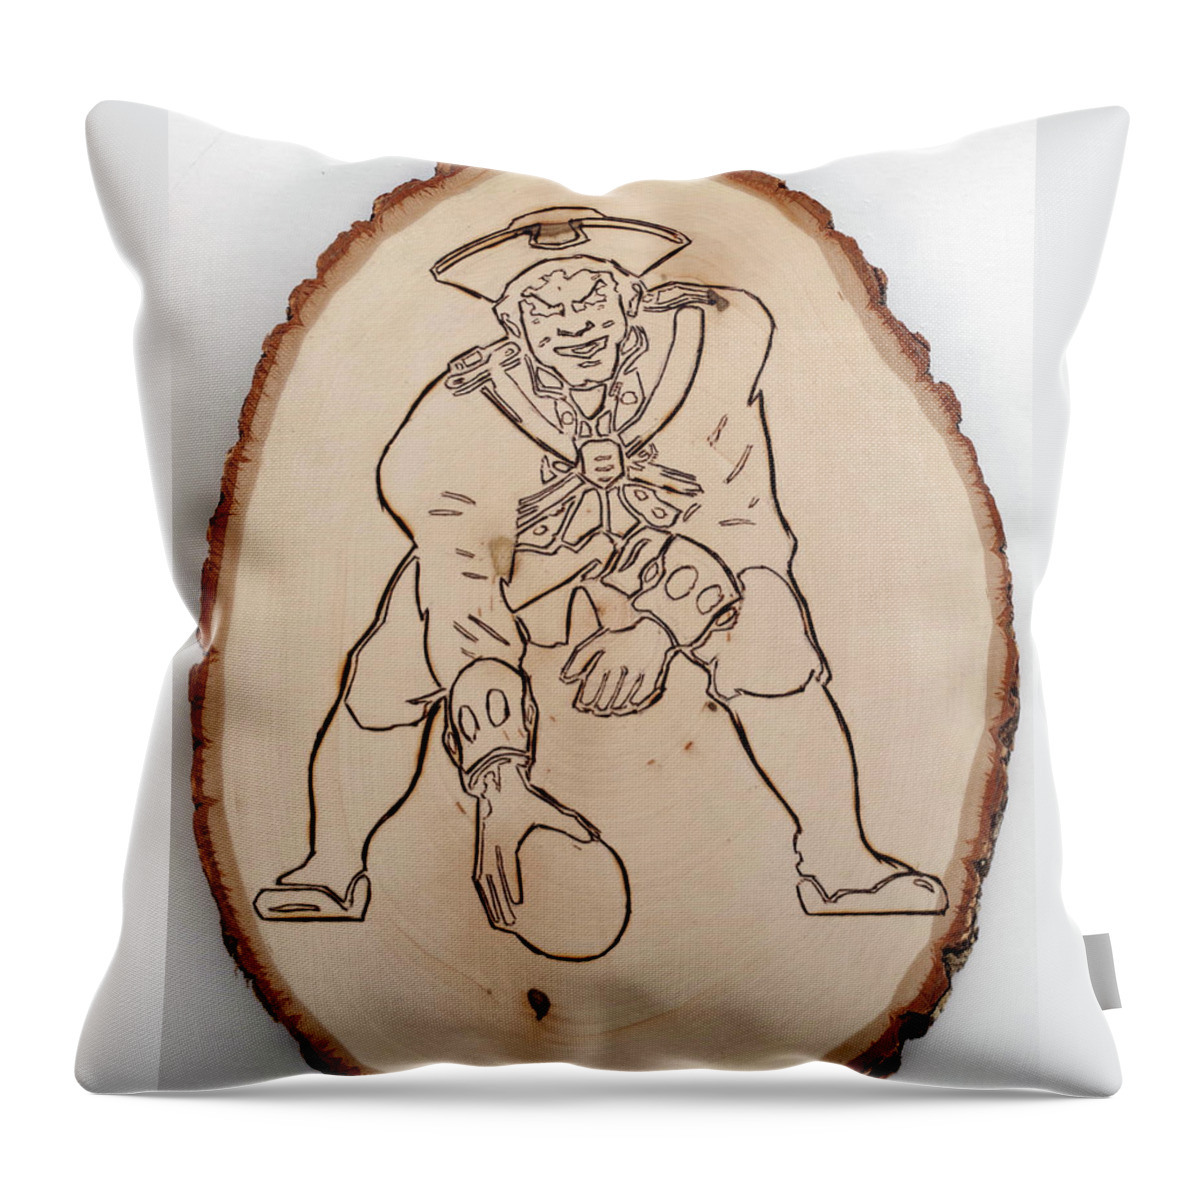 Pyrography Throw Pillow featuring the pyrography Boston Patriots est 1960 by Sean Connolly